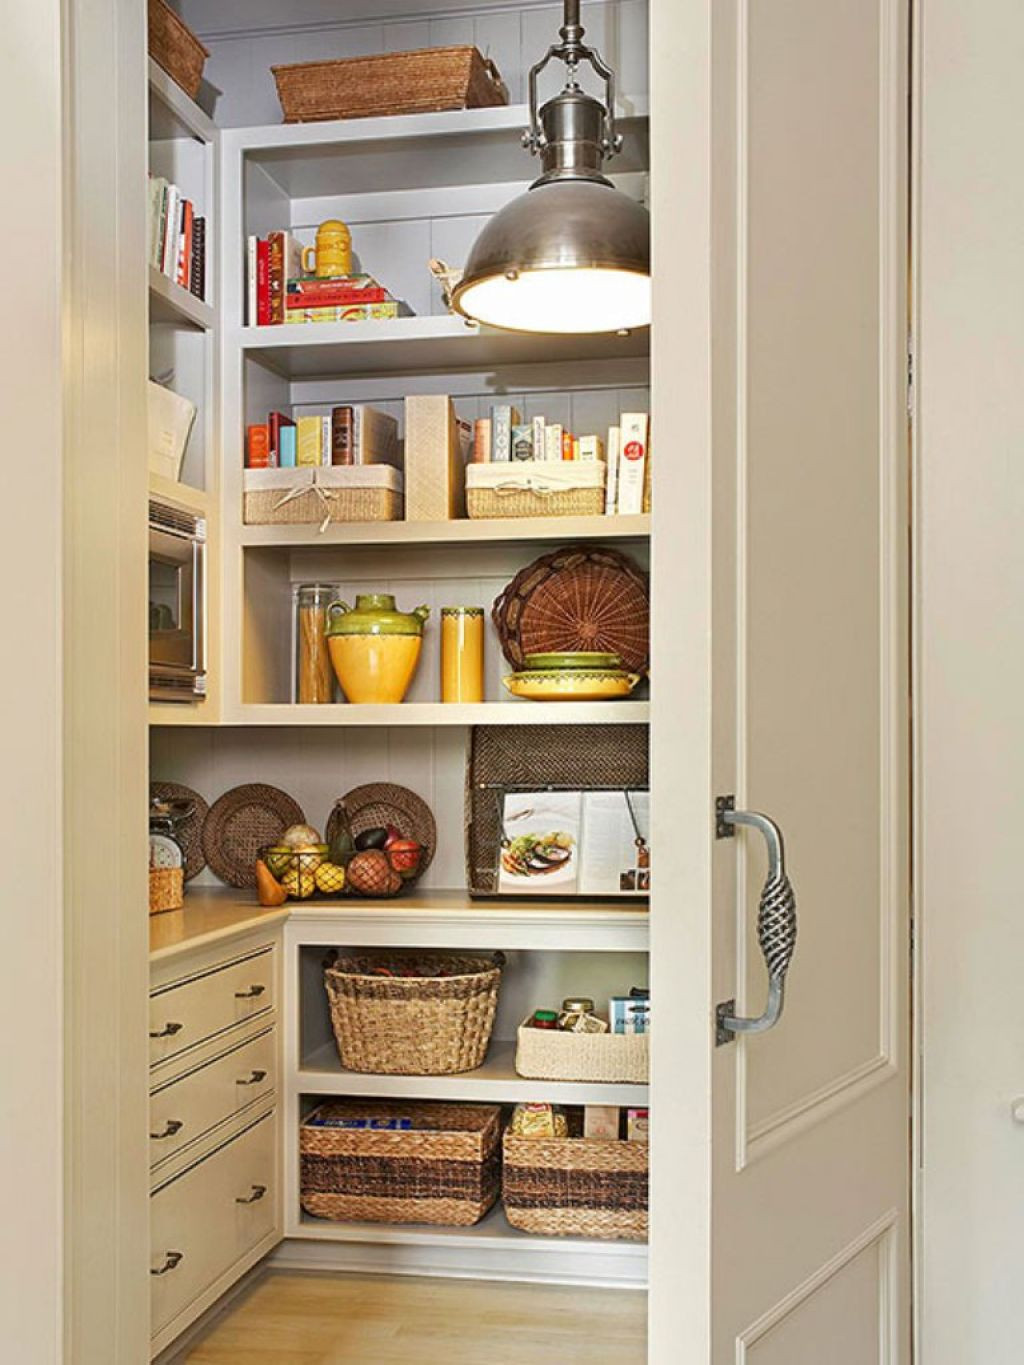 Pantry Ideas In Small Kitchen
 small kitchen pantry ideas Jennies Blog small kitchen